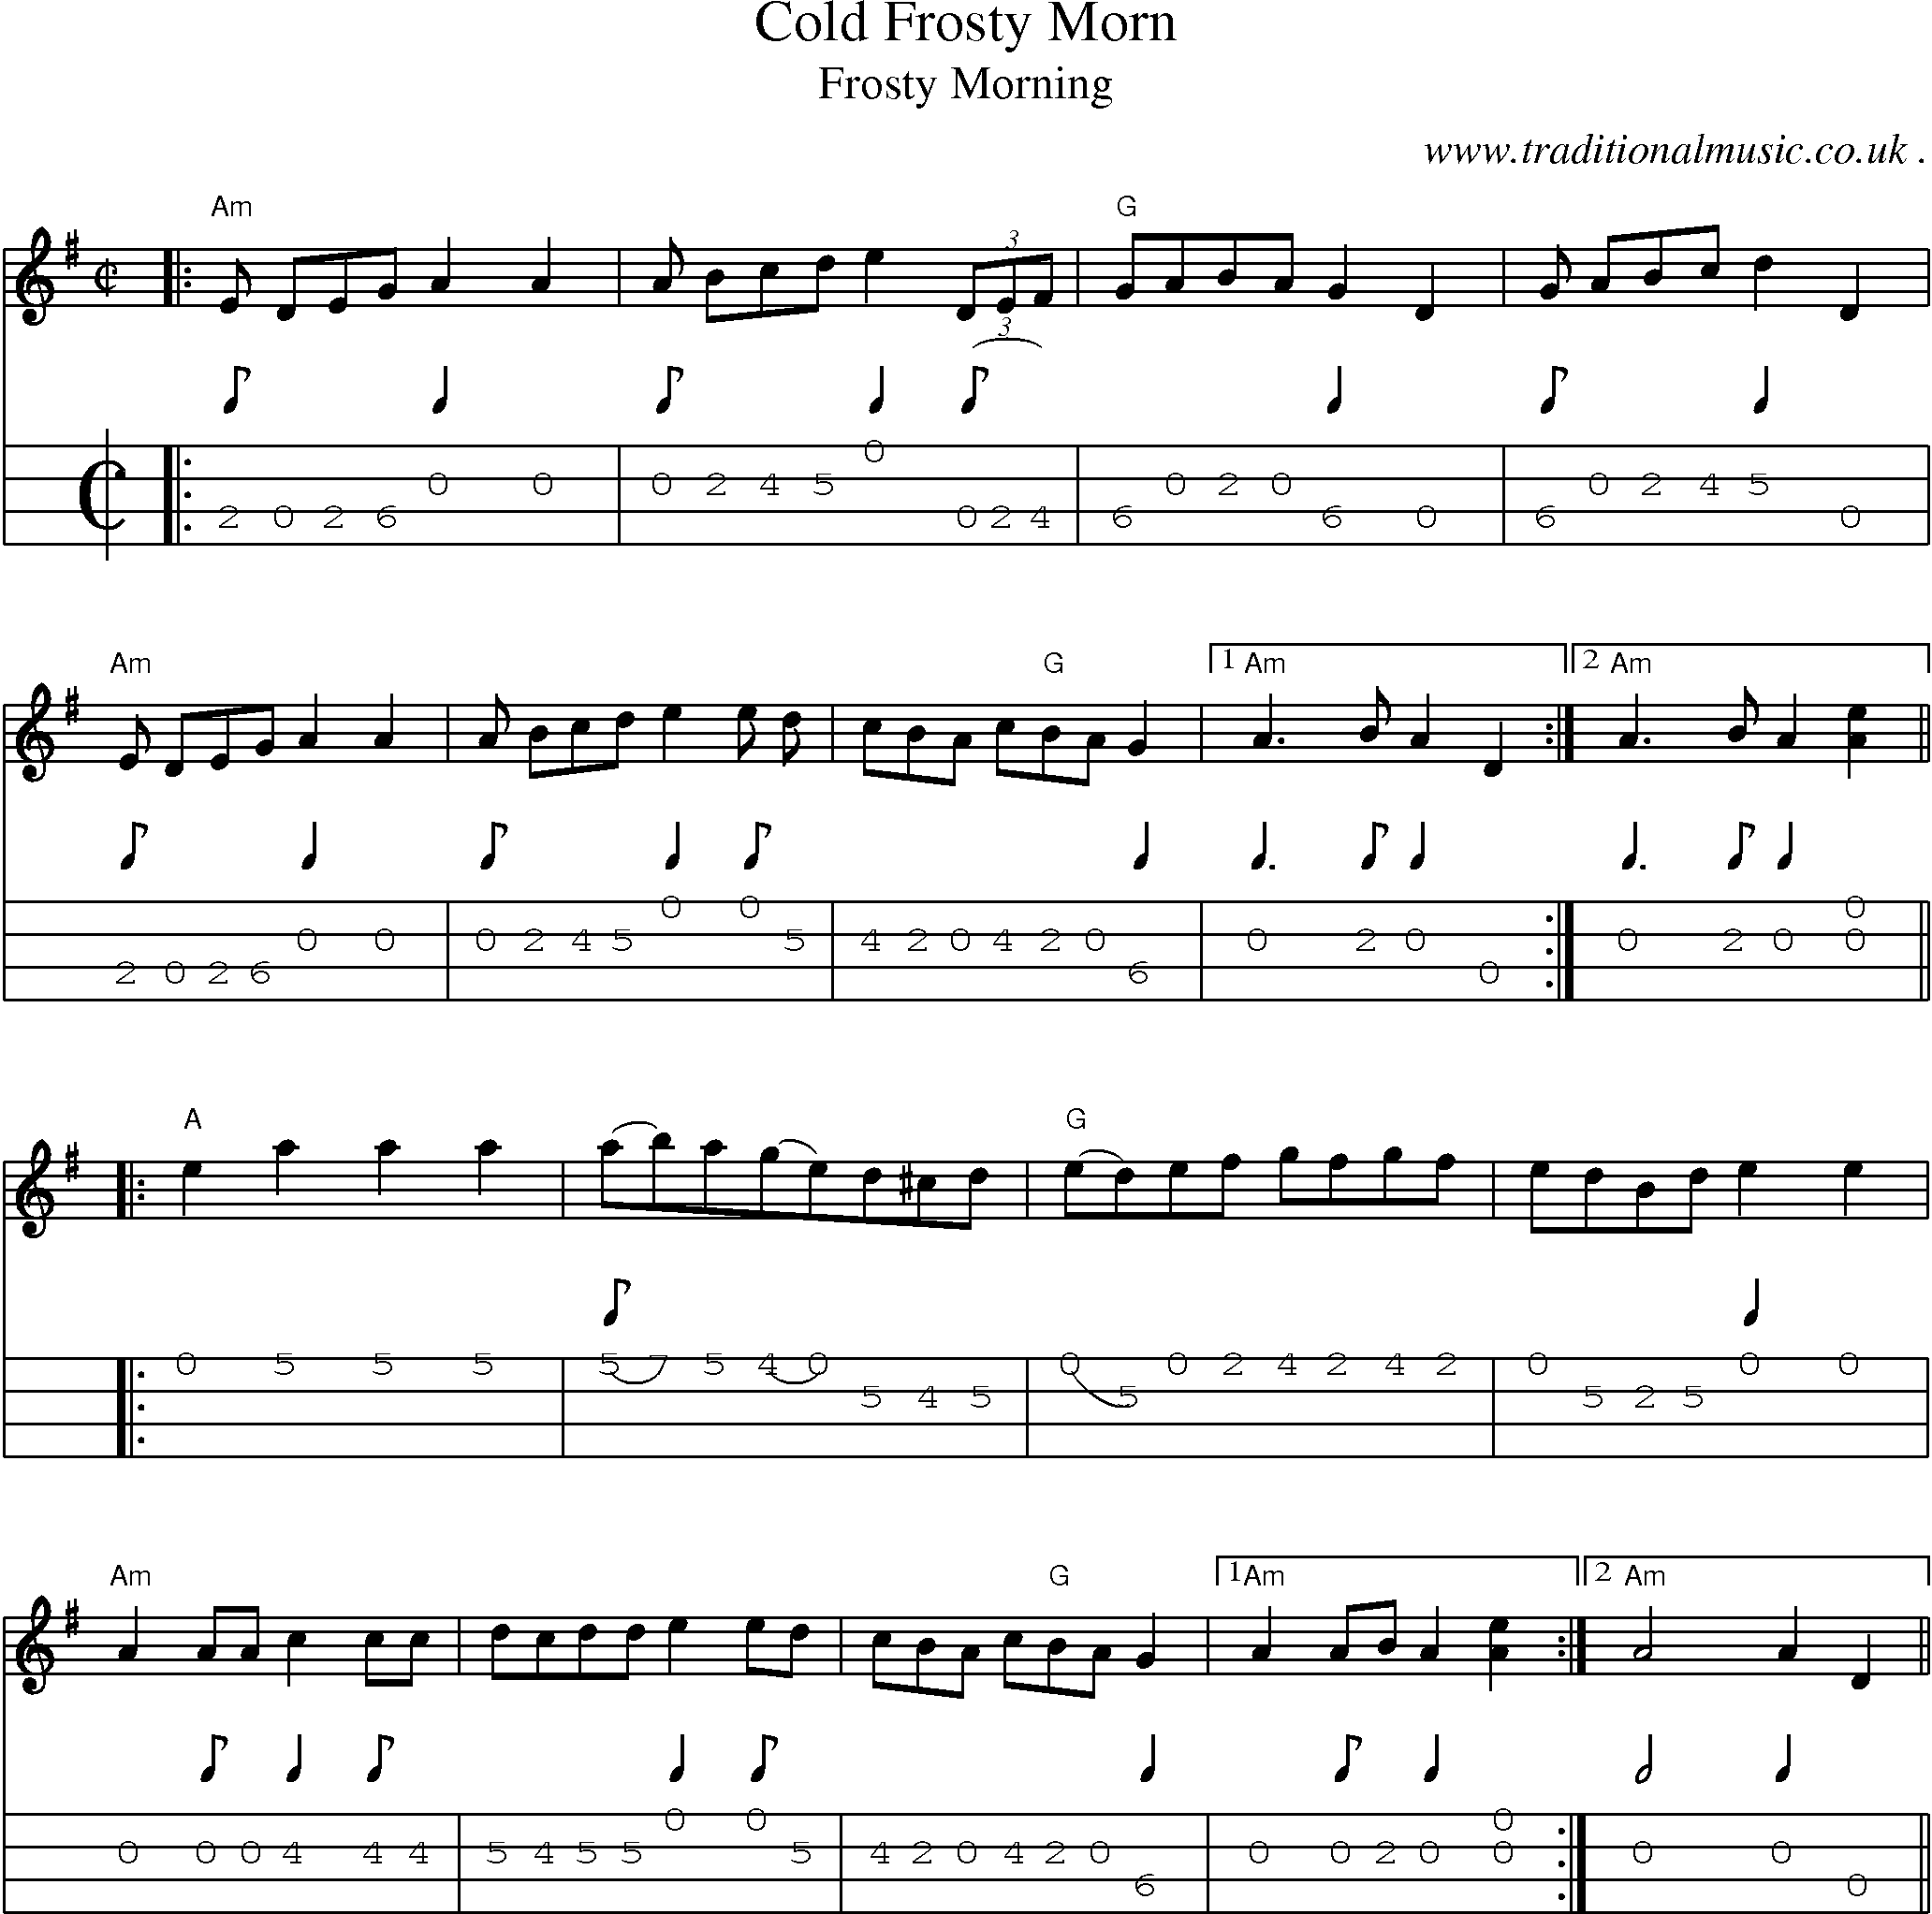 Music Score and Guitar Tabs for Cold Frosty Morn